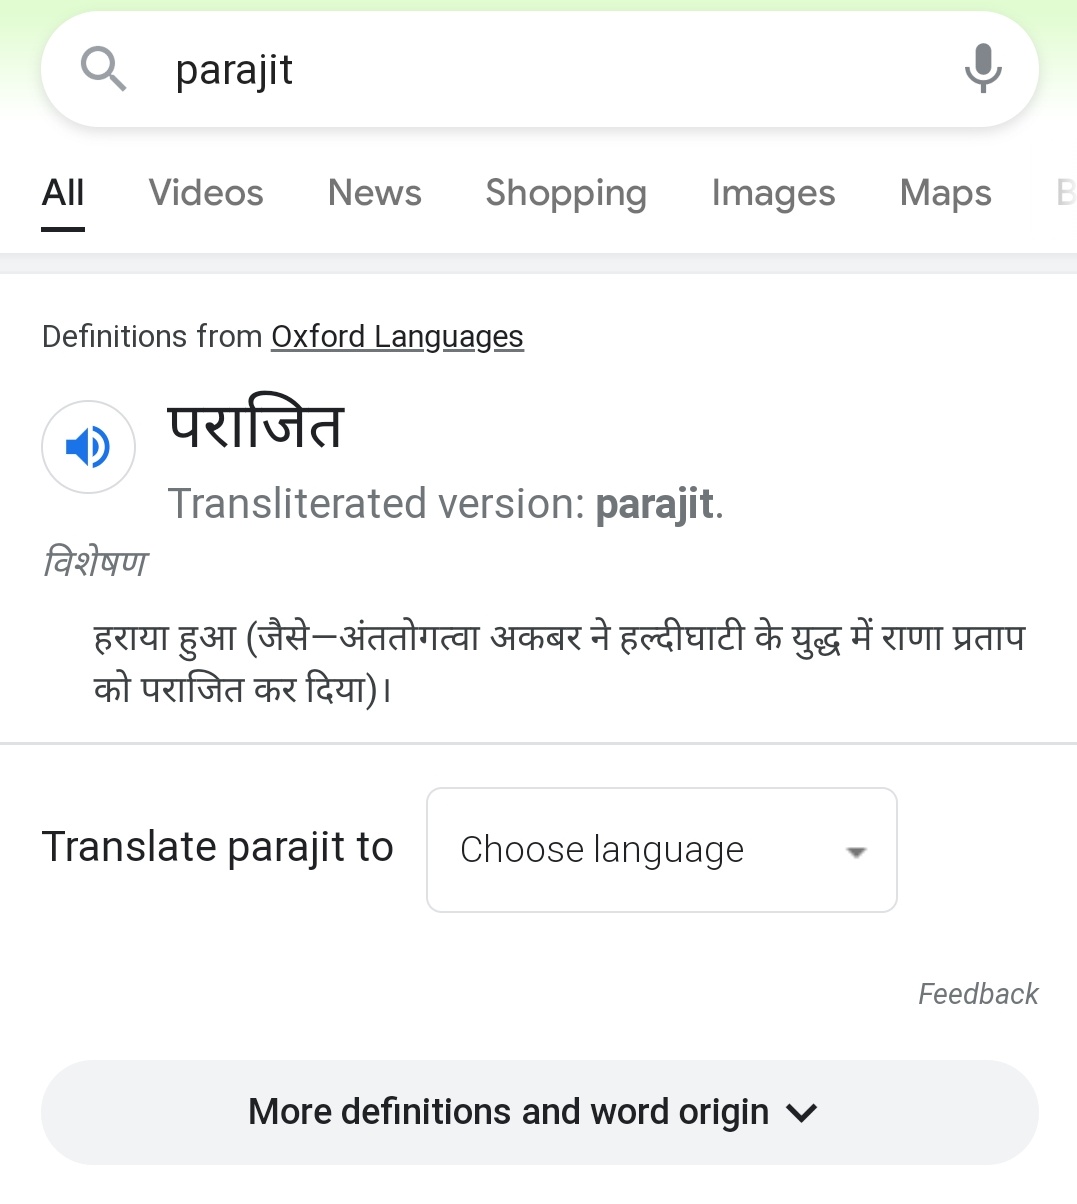 Anshul Saxena On Twitter: "According To Google Word Search, Hindi Word  'Parajit' Means 'Lost'. It Also Shows An Example: 'Akbar Defeated Maharana  Pratap In The Battle Of Haldighati.' Now, Google Has Removed